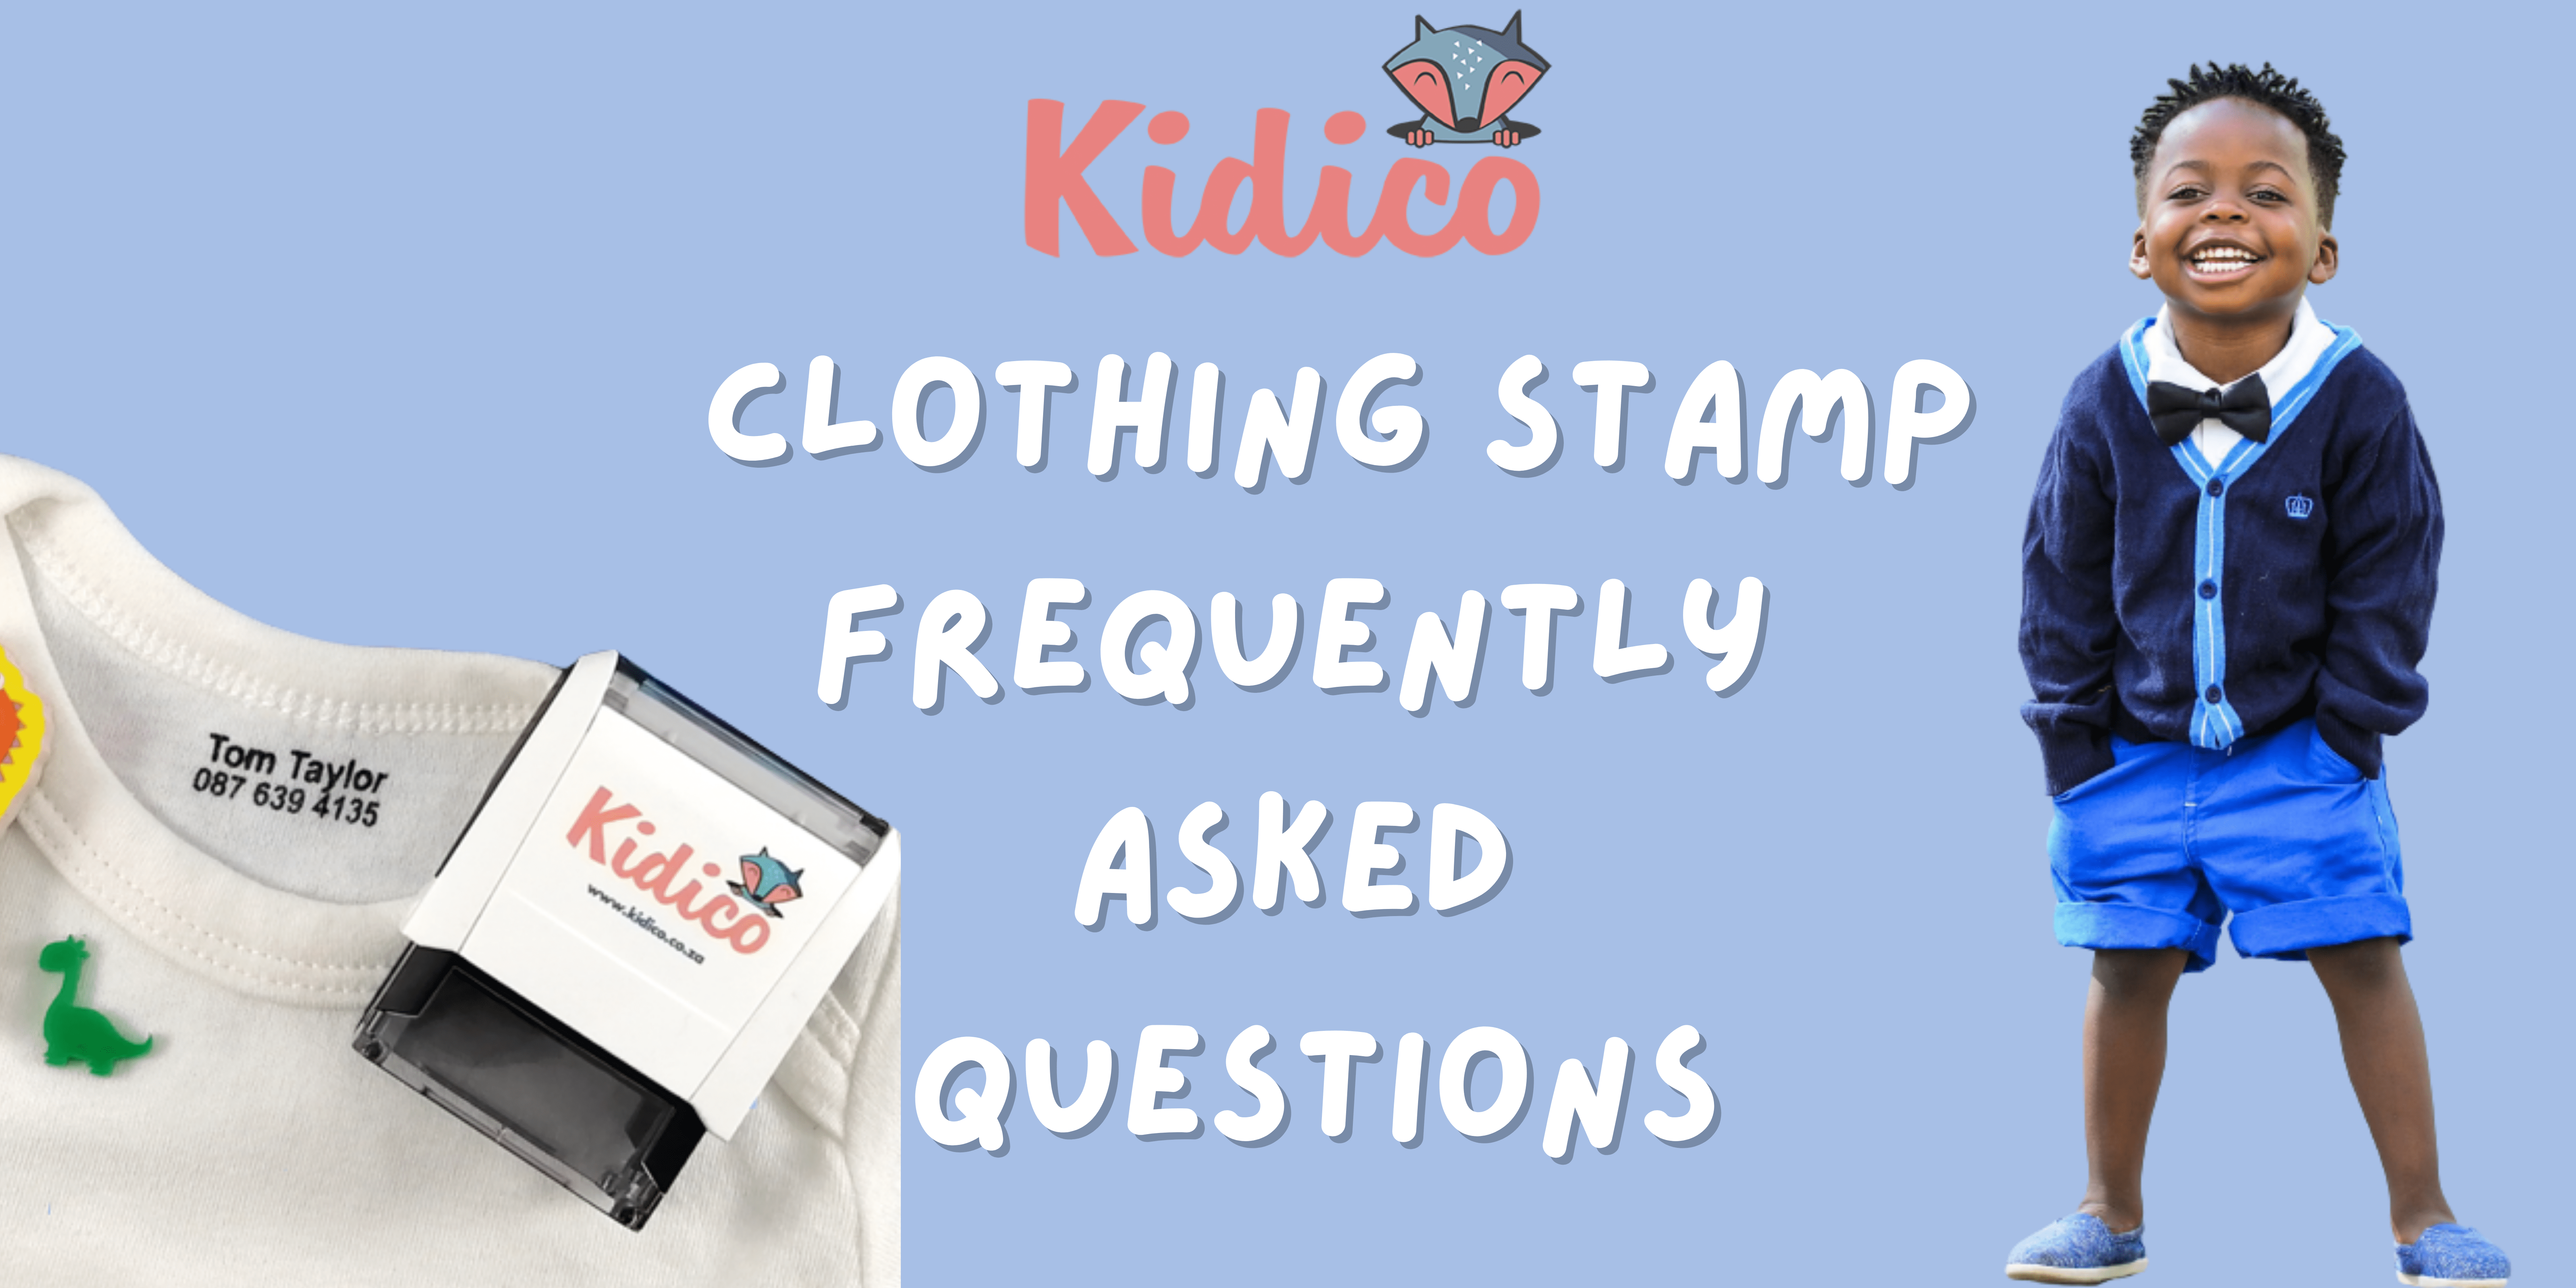 Kidico Clothing Stamp: Frequently Asked Questions - Kidico